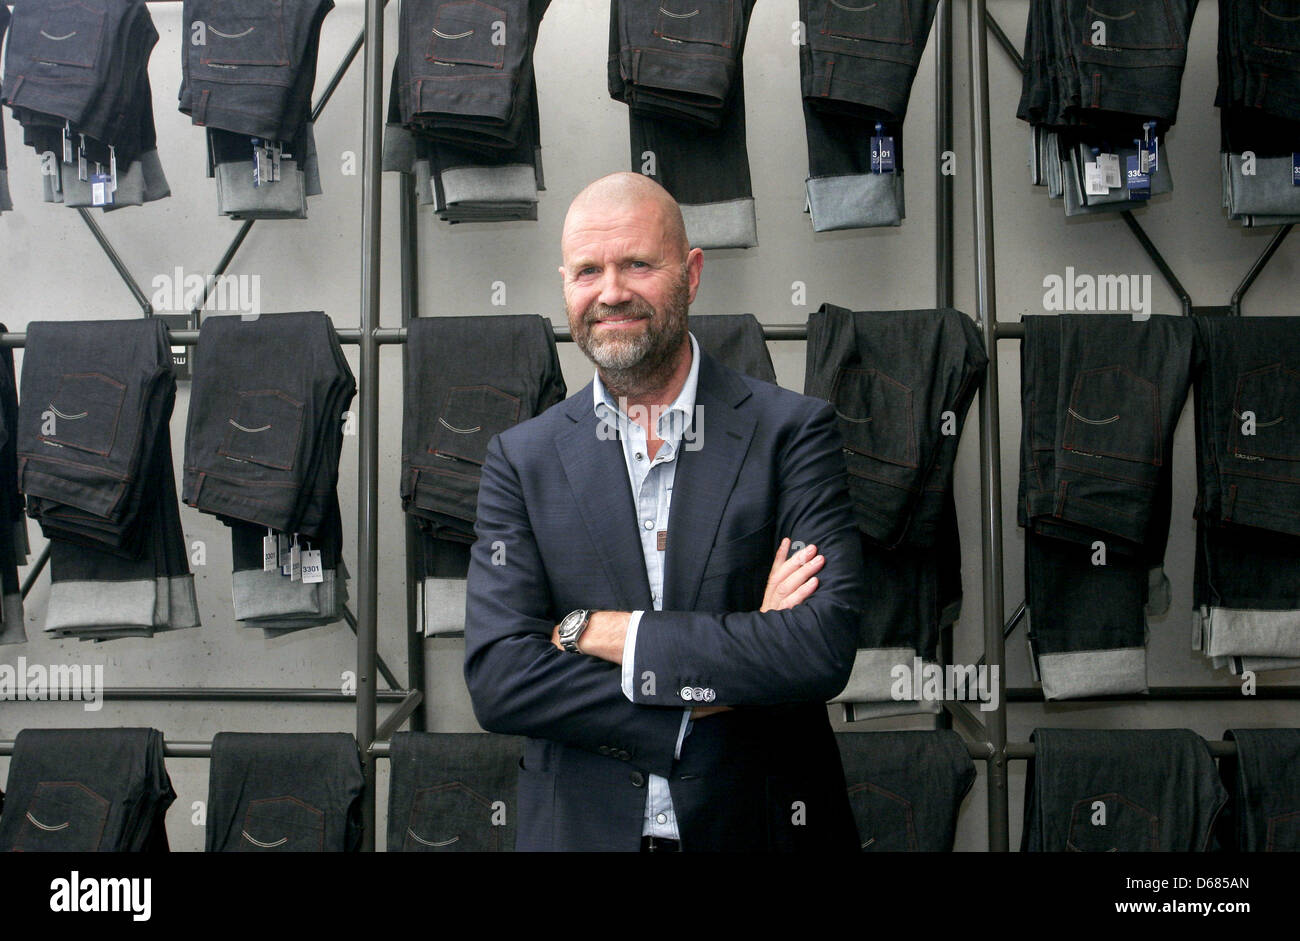 Head of the jeans label G Star, Jos van Tilburg, poses at a booth of the  label at the fashion fair Bread & Butter in Berlin, Germany, 04 July 2012.  Photo: XAMAX